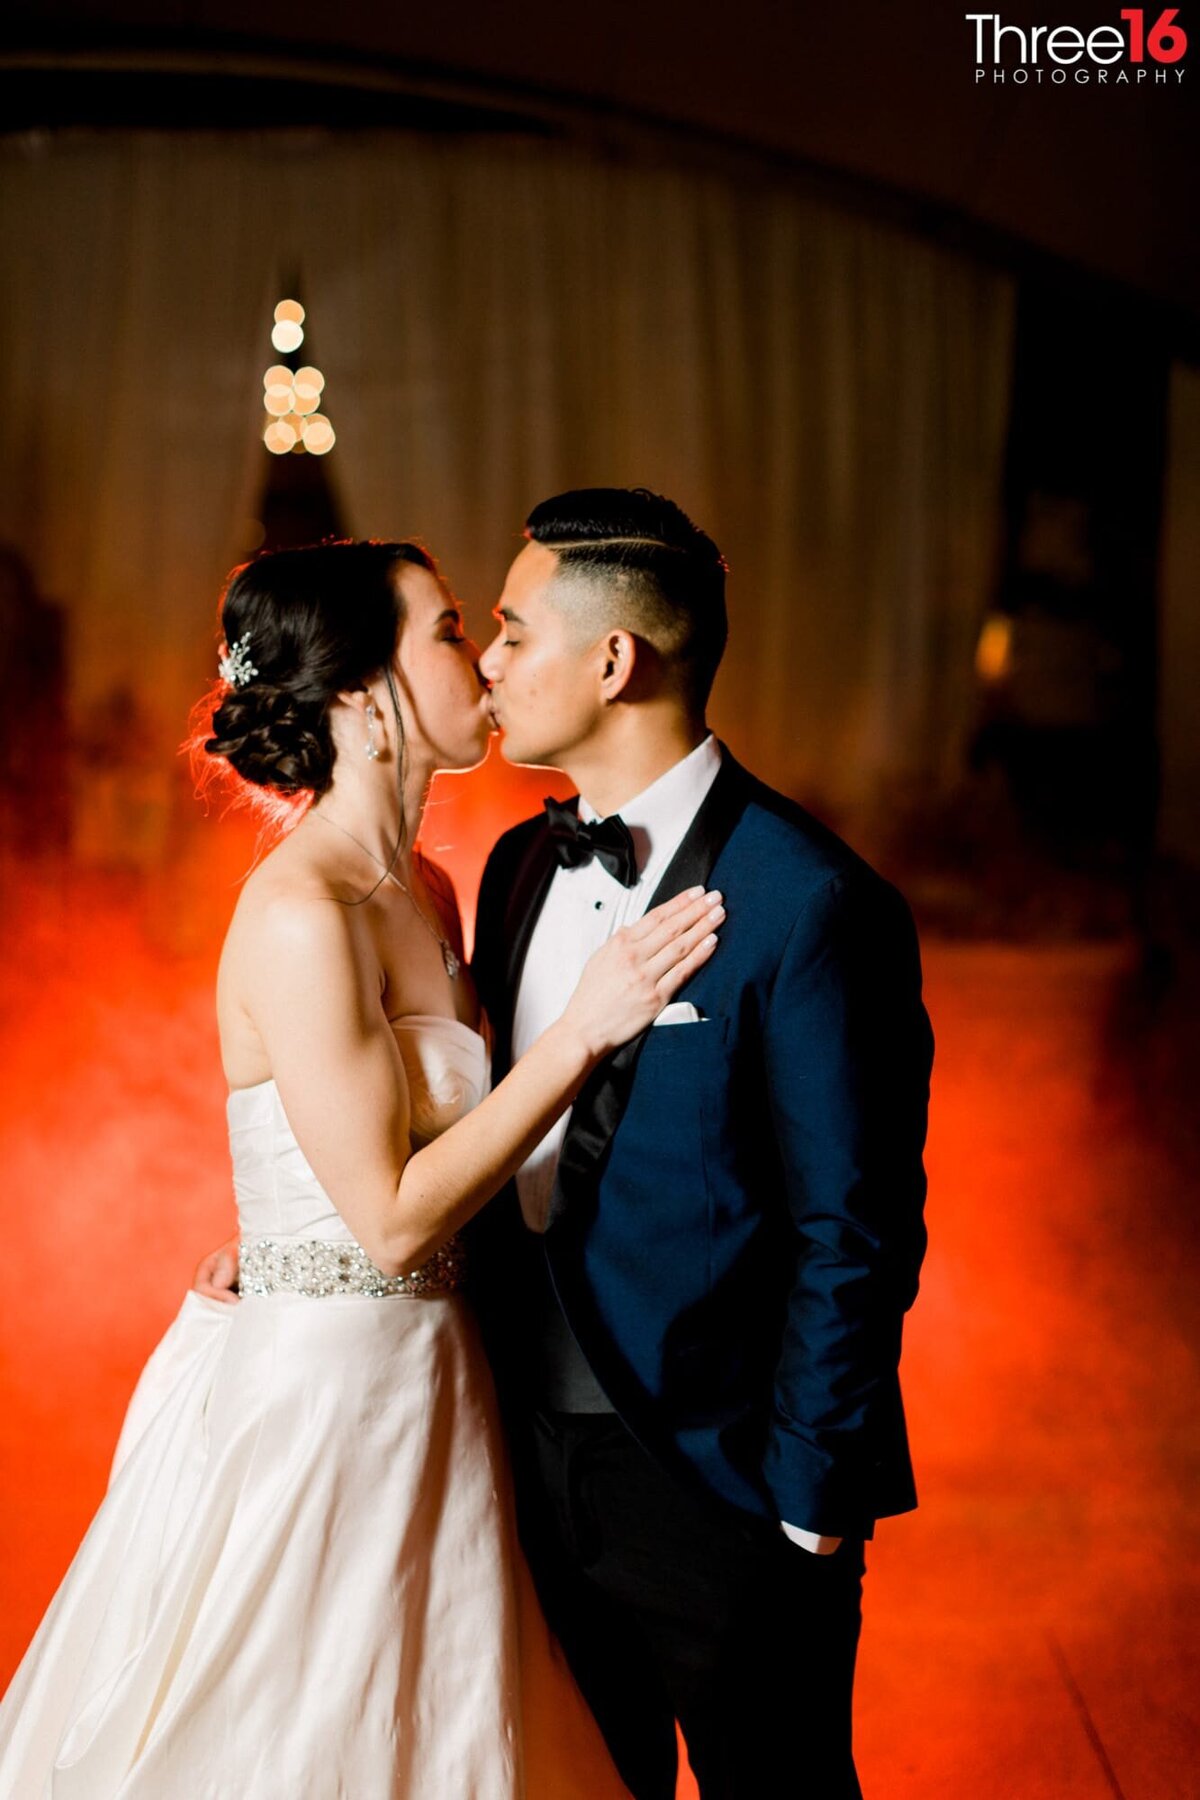 Bride and Groom share a sweet tender kiss